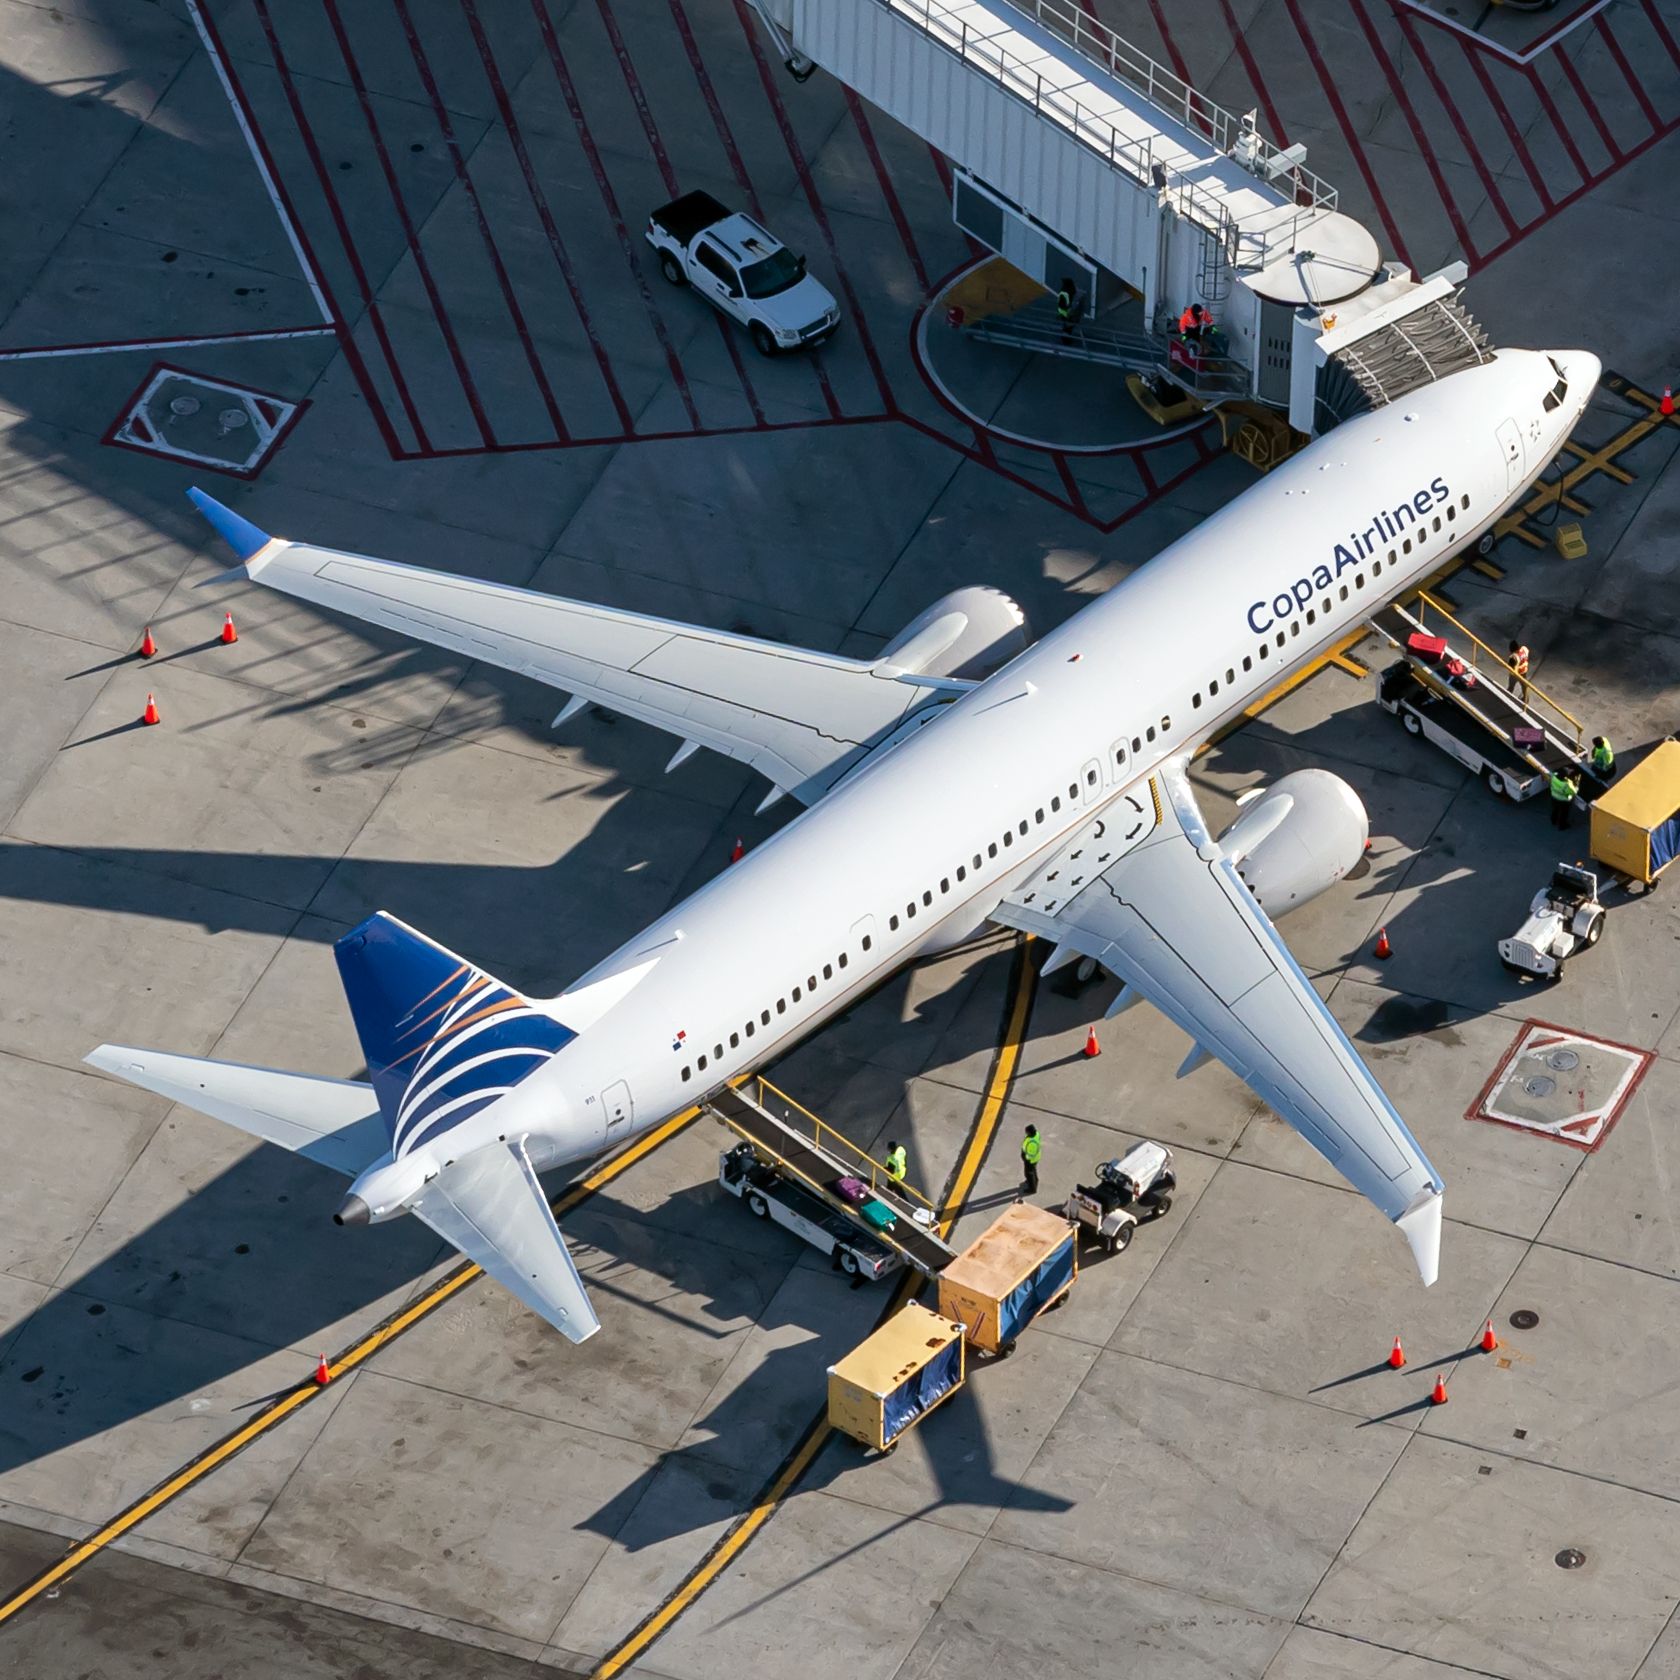 A Copa Airlines Boeing 737-800 Parked on an airport apron at a gate.